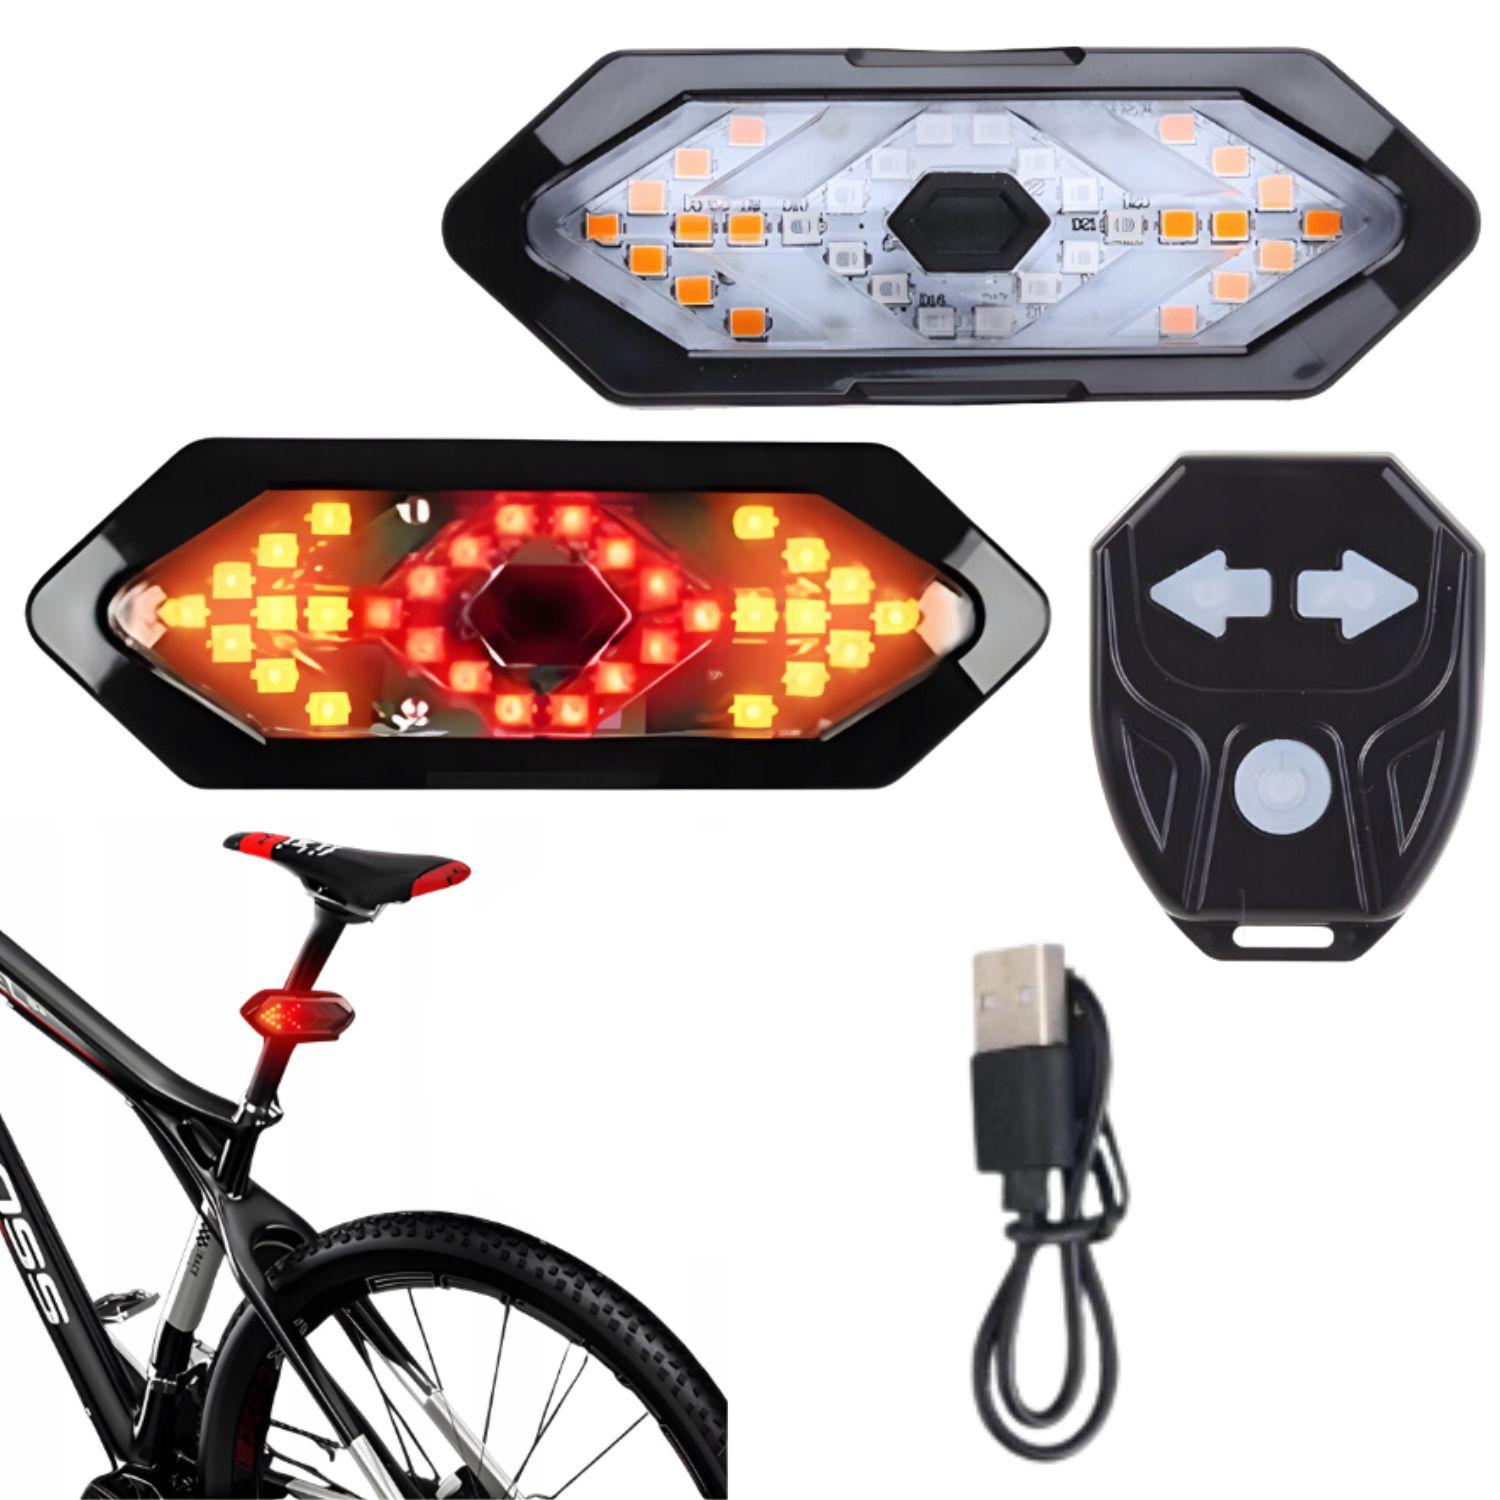 Direction blinker for electric scooter / bicycle